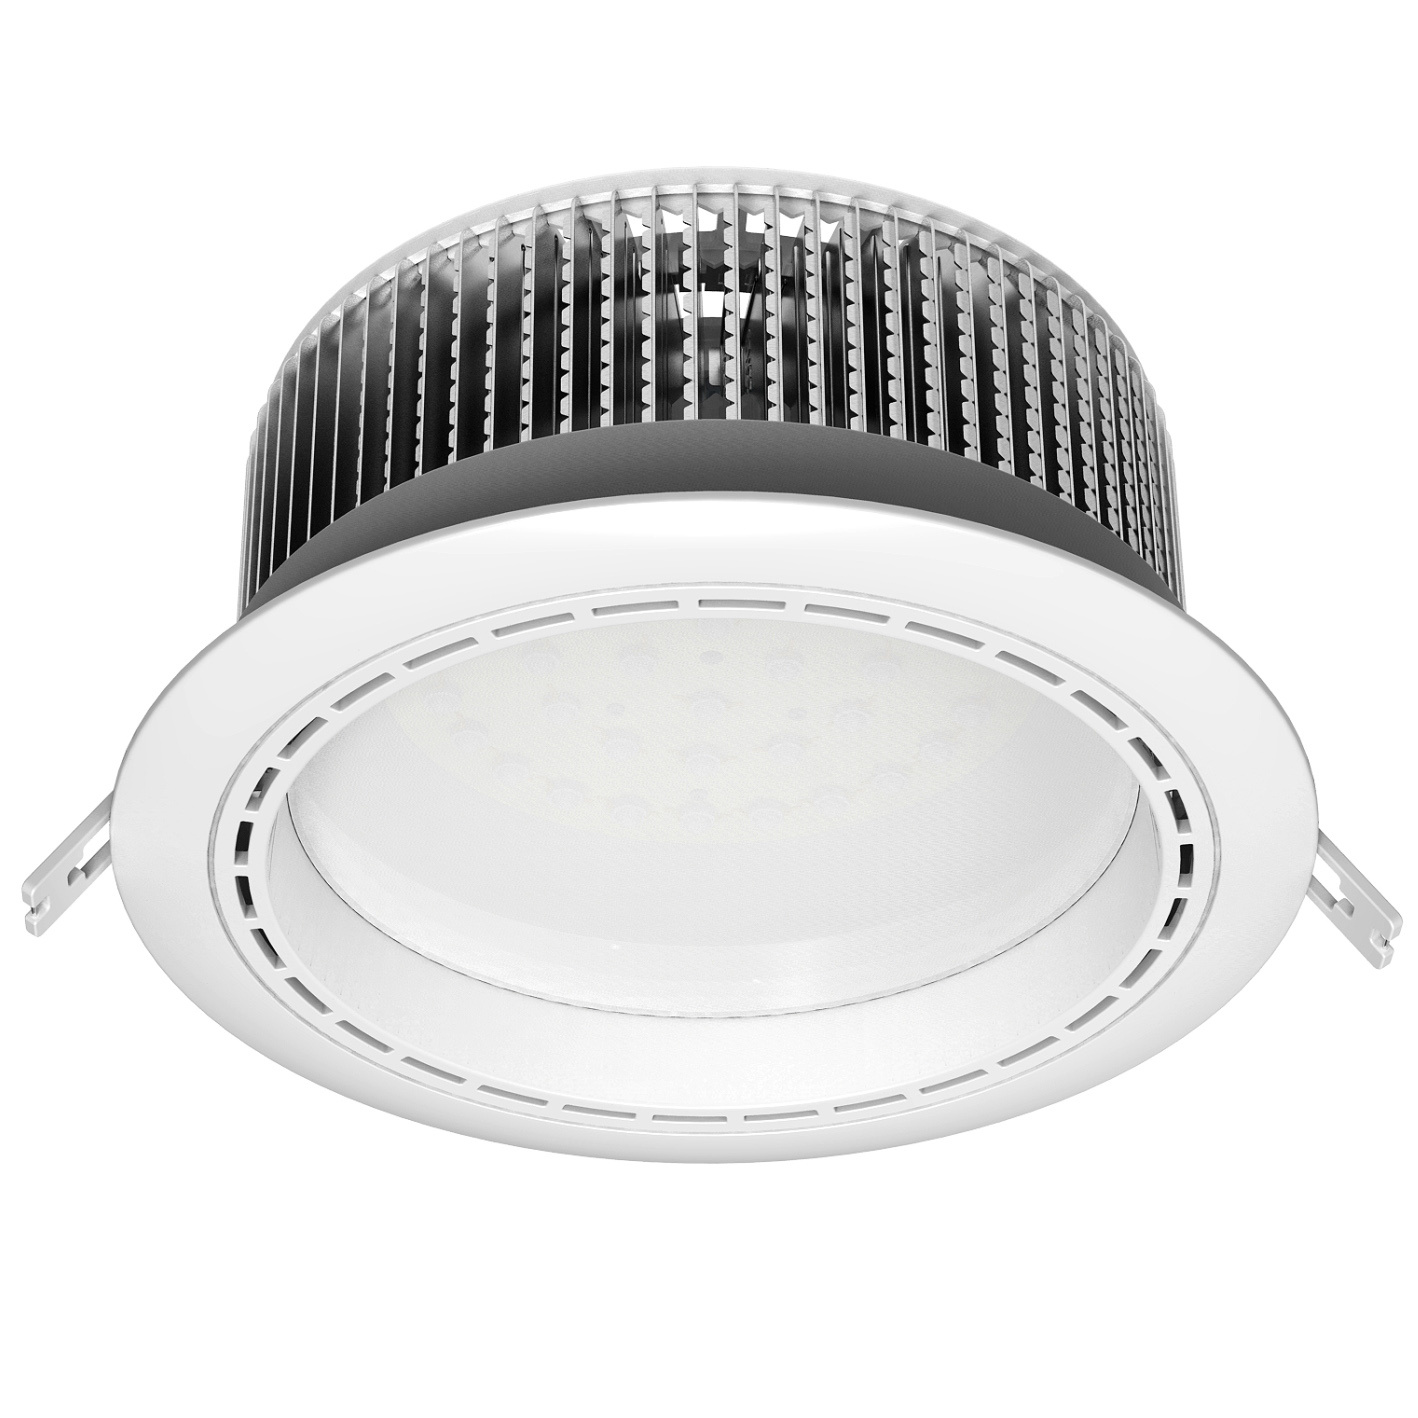 36W High Power LED Ceiling Lights (CL-CL-36W-01)